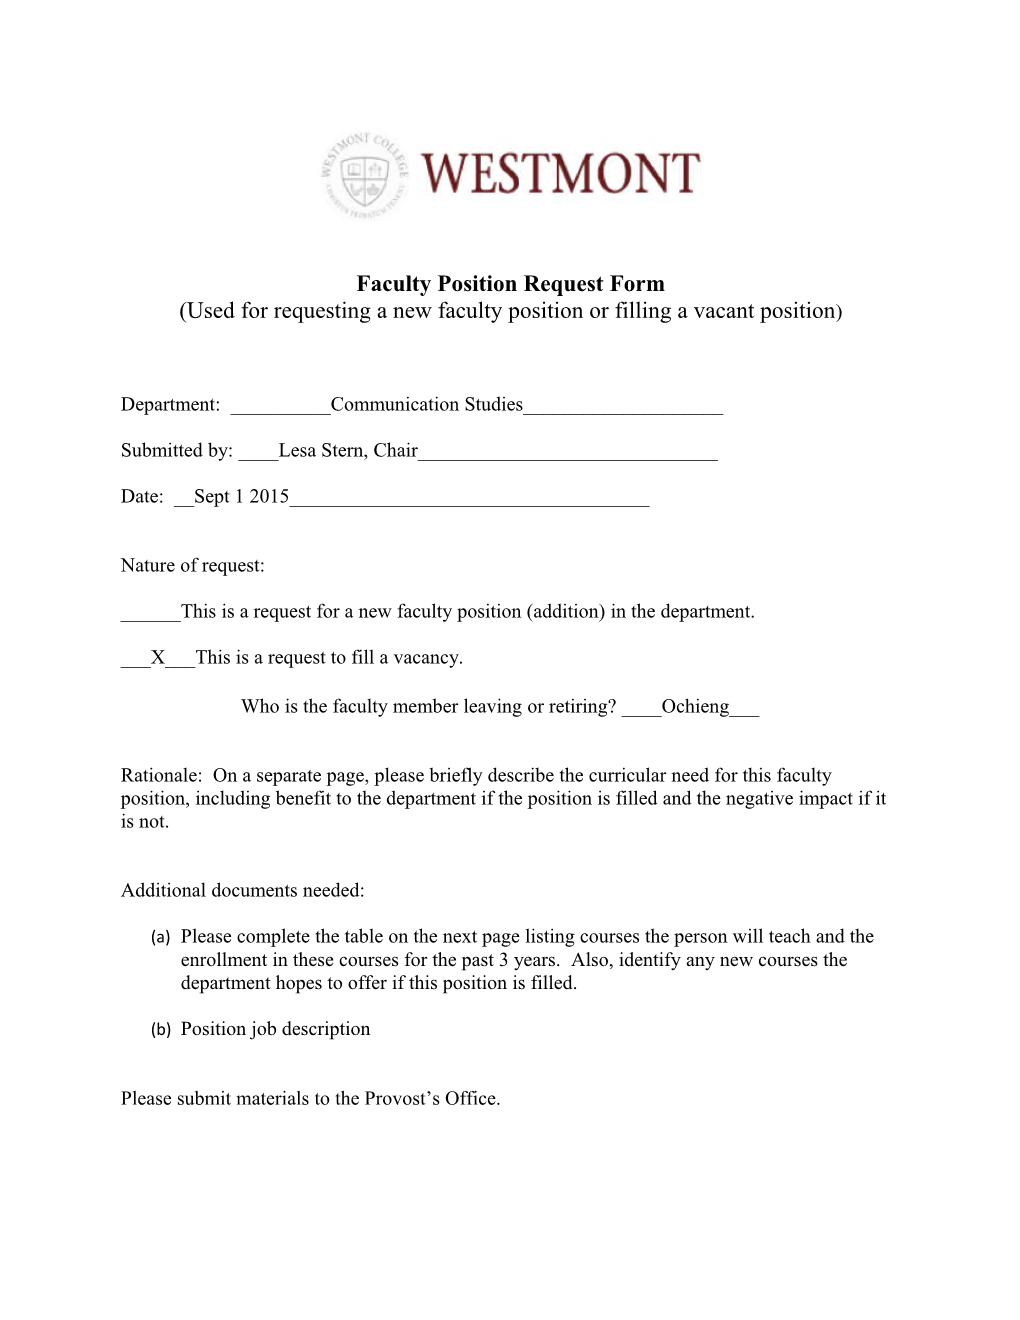 Faculty Position Request Form s1